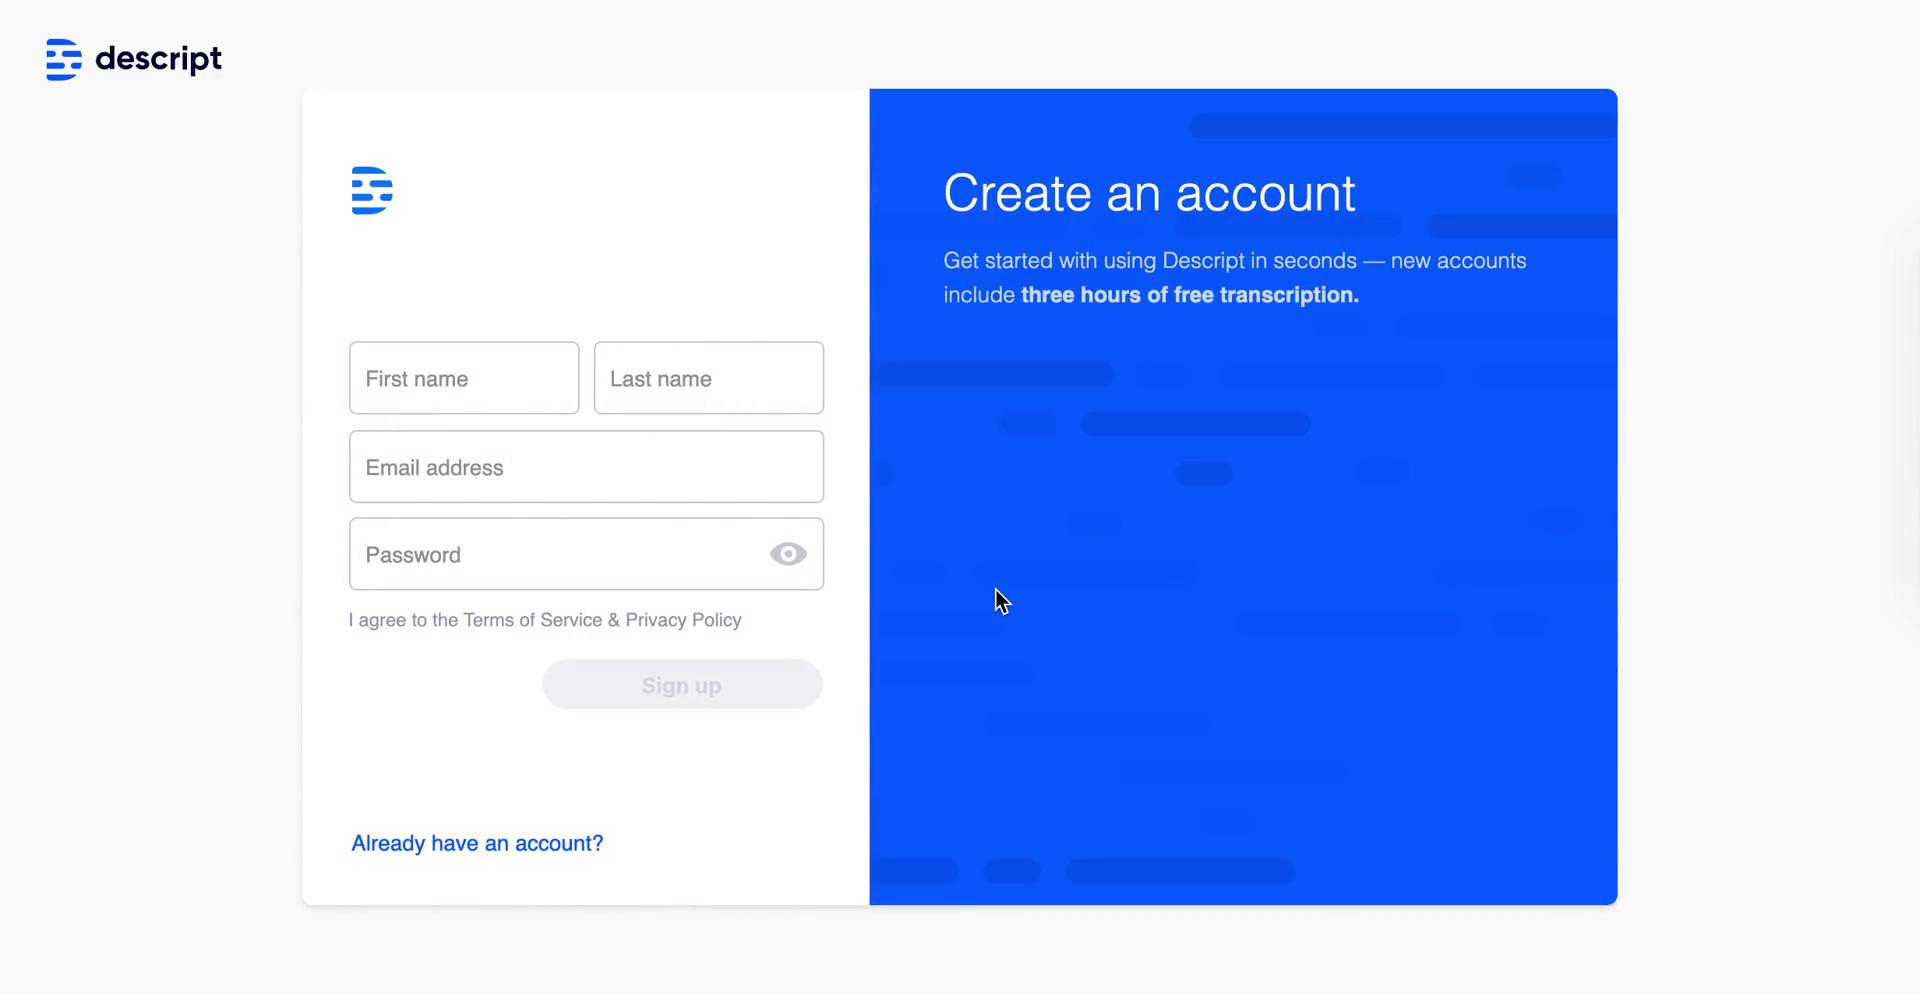 Screenshot of Sign up on Accepting an invite on Descript user flow